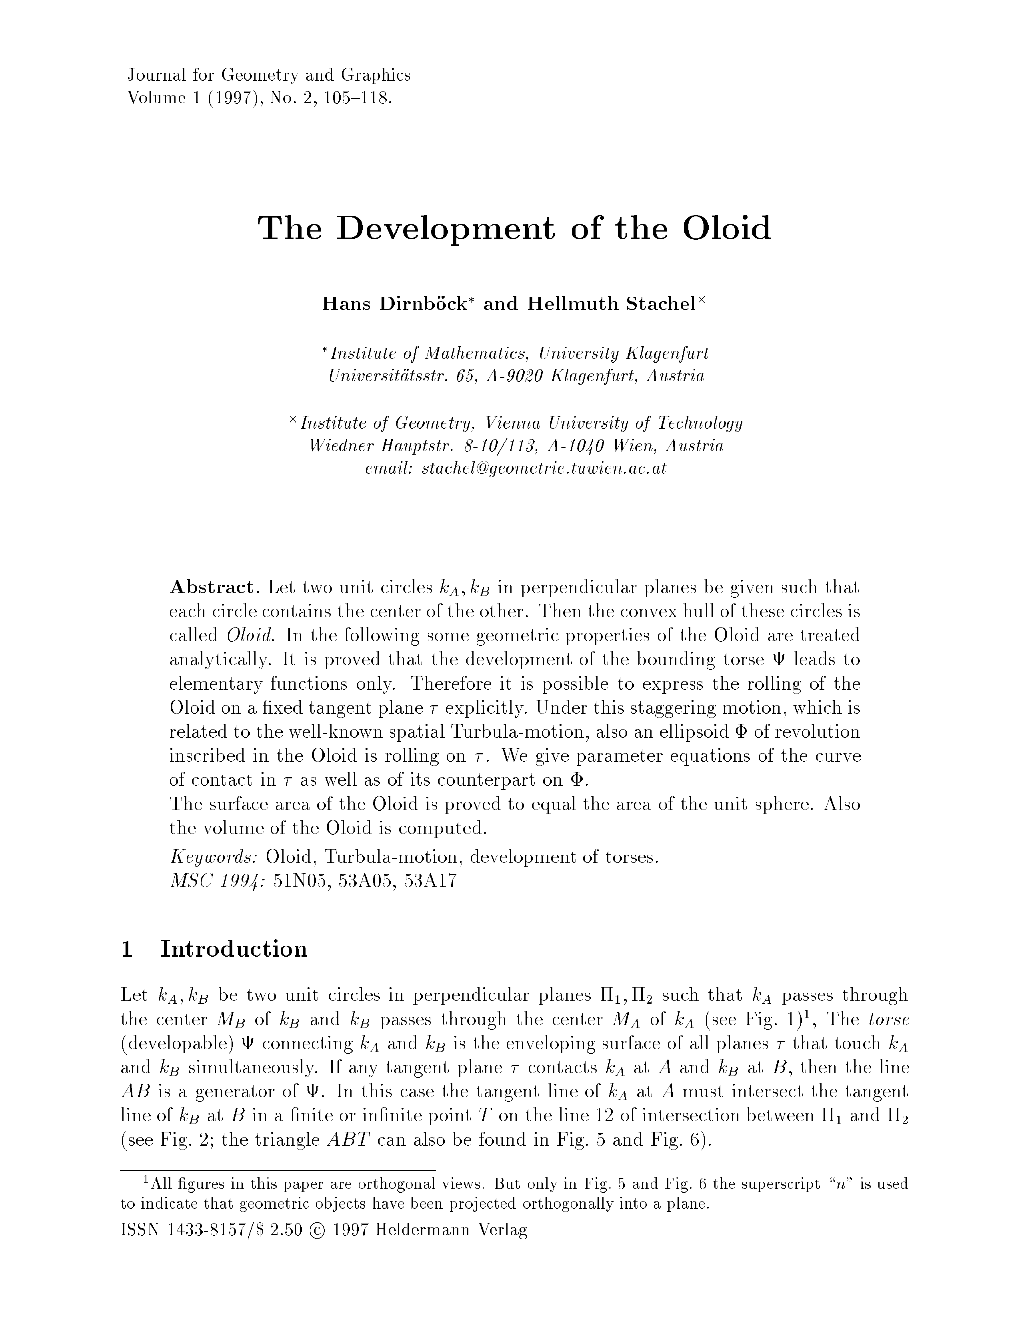 The Development of the Oloid